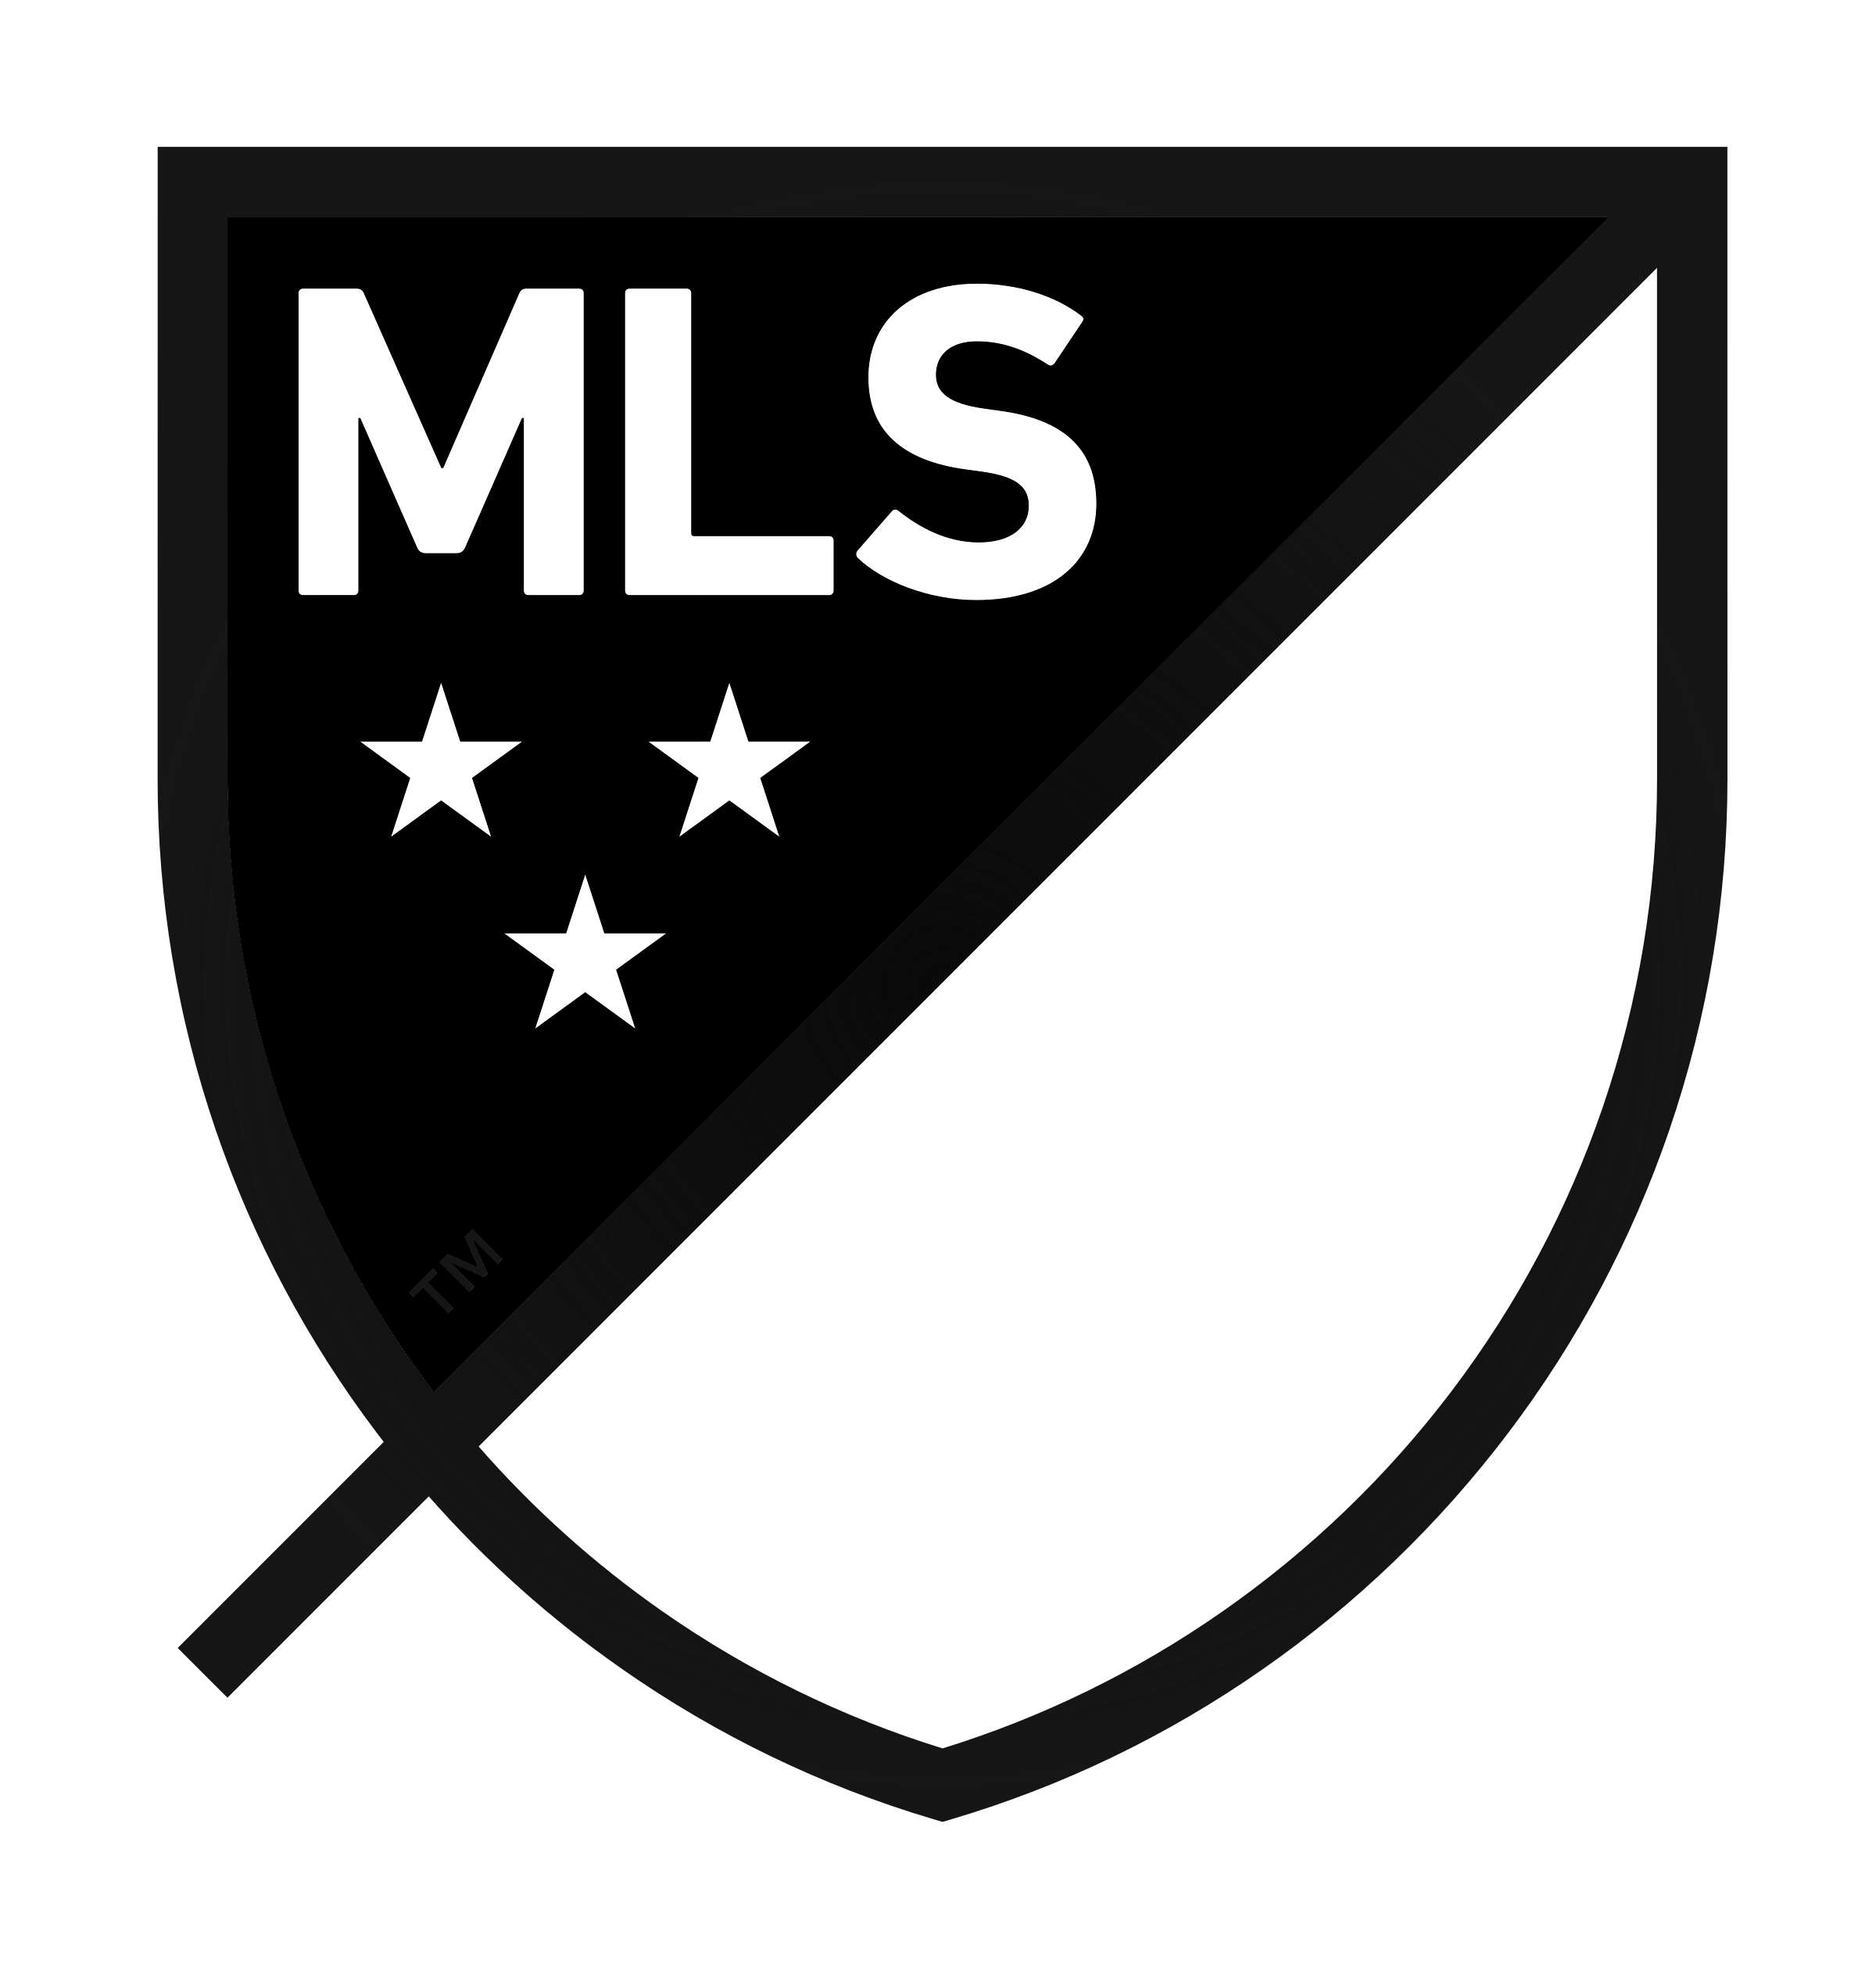 mls-logo-black-and-white.png